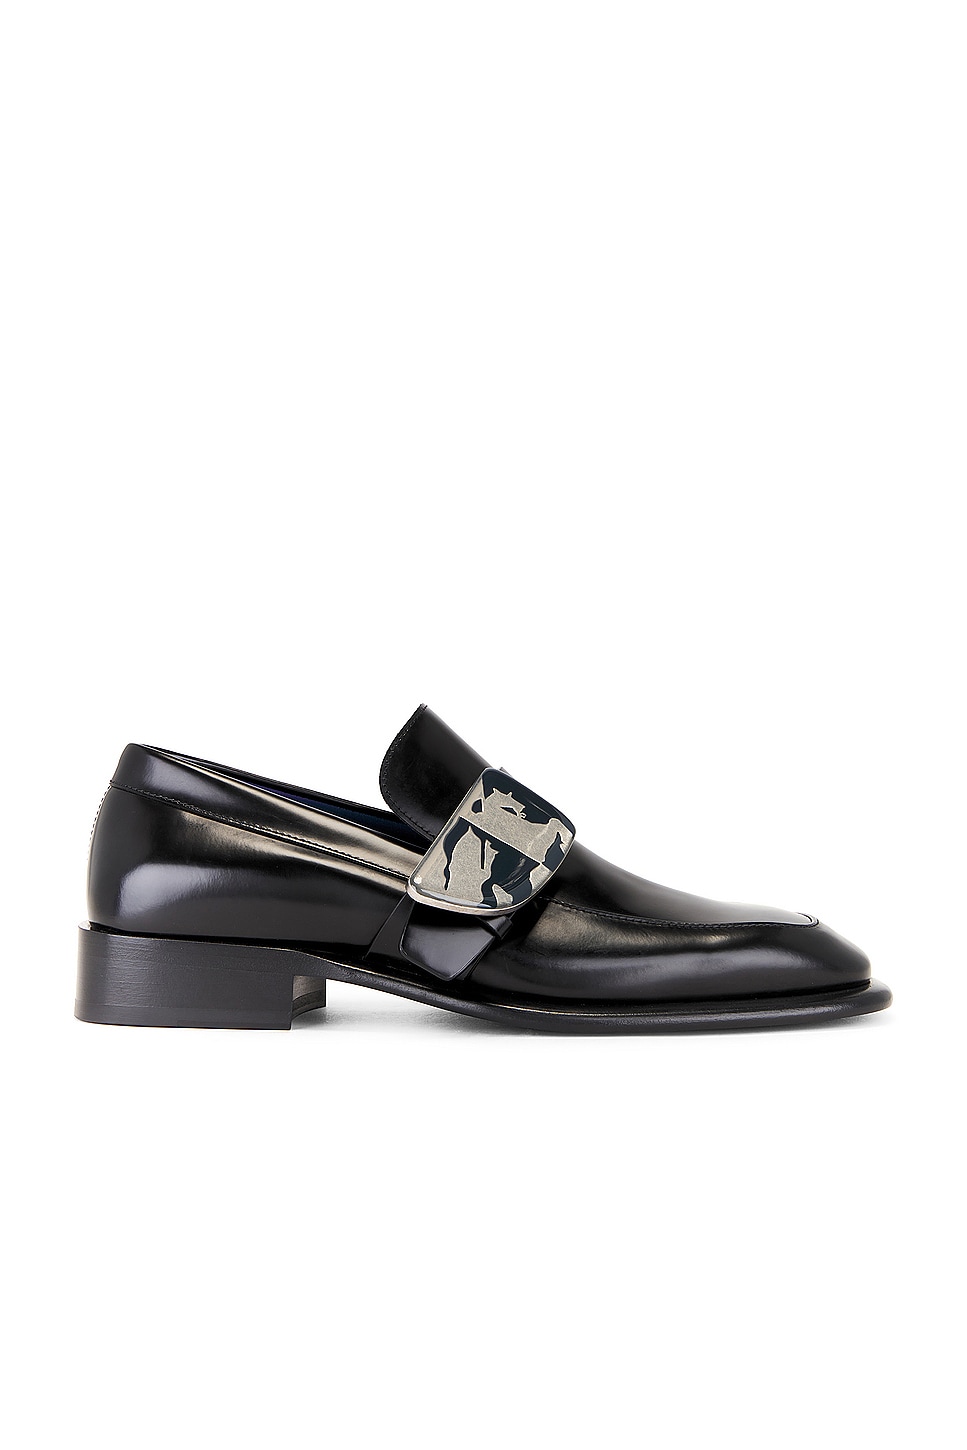 Image 1 of Burberry Shield Loafer in Black